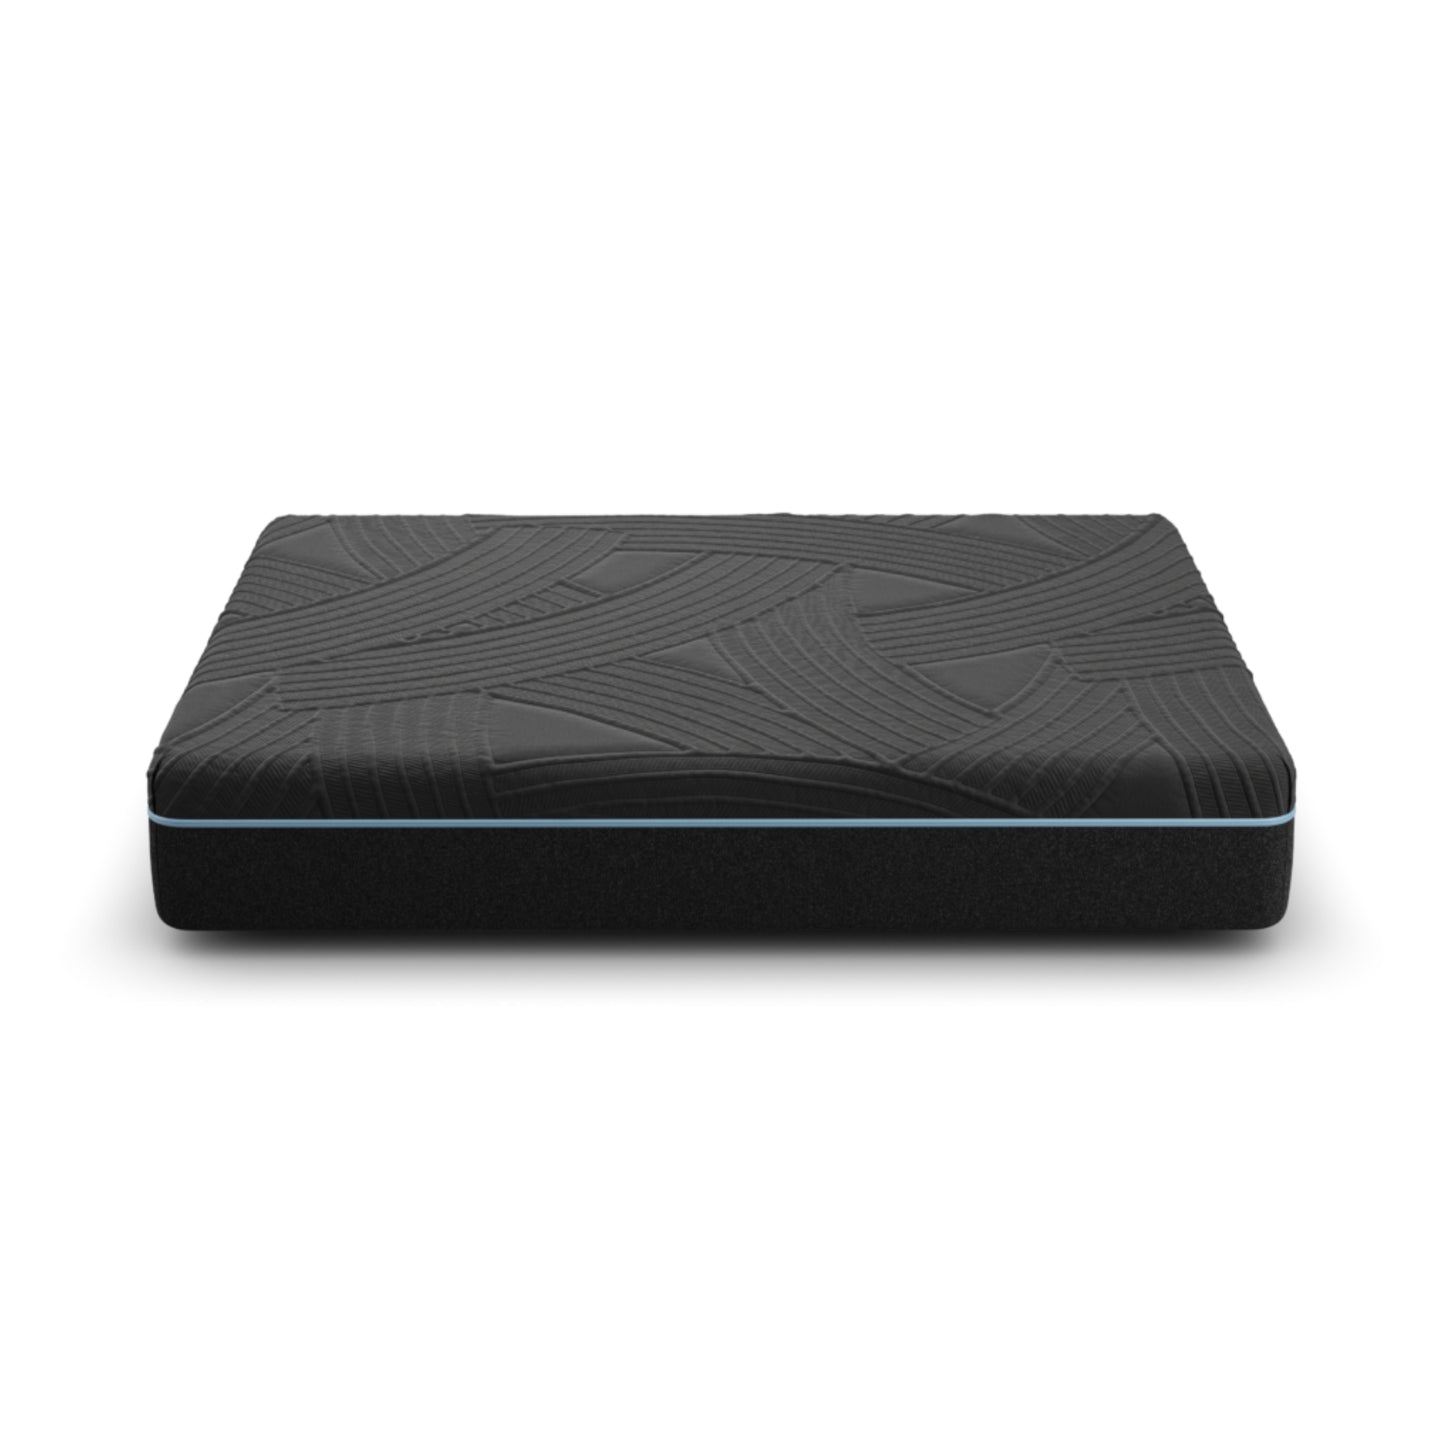 Firm PowerCool 11.5" Hybrid Mattress With Ventilated Memory Foam Pillow(s) And Adjustable Base Featuring Integrated Cooling Fans, Side View